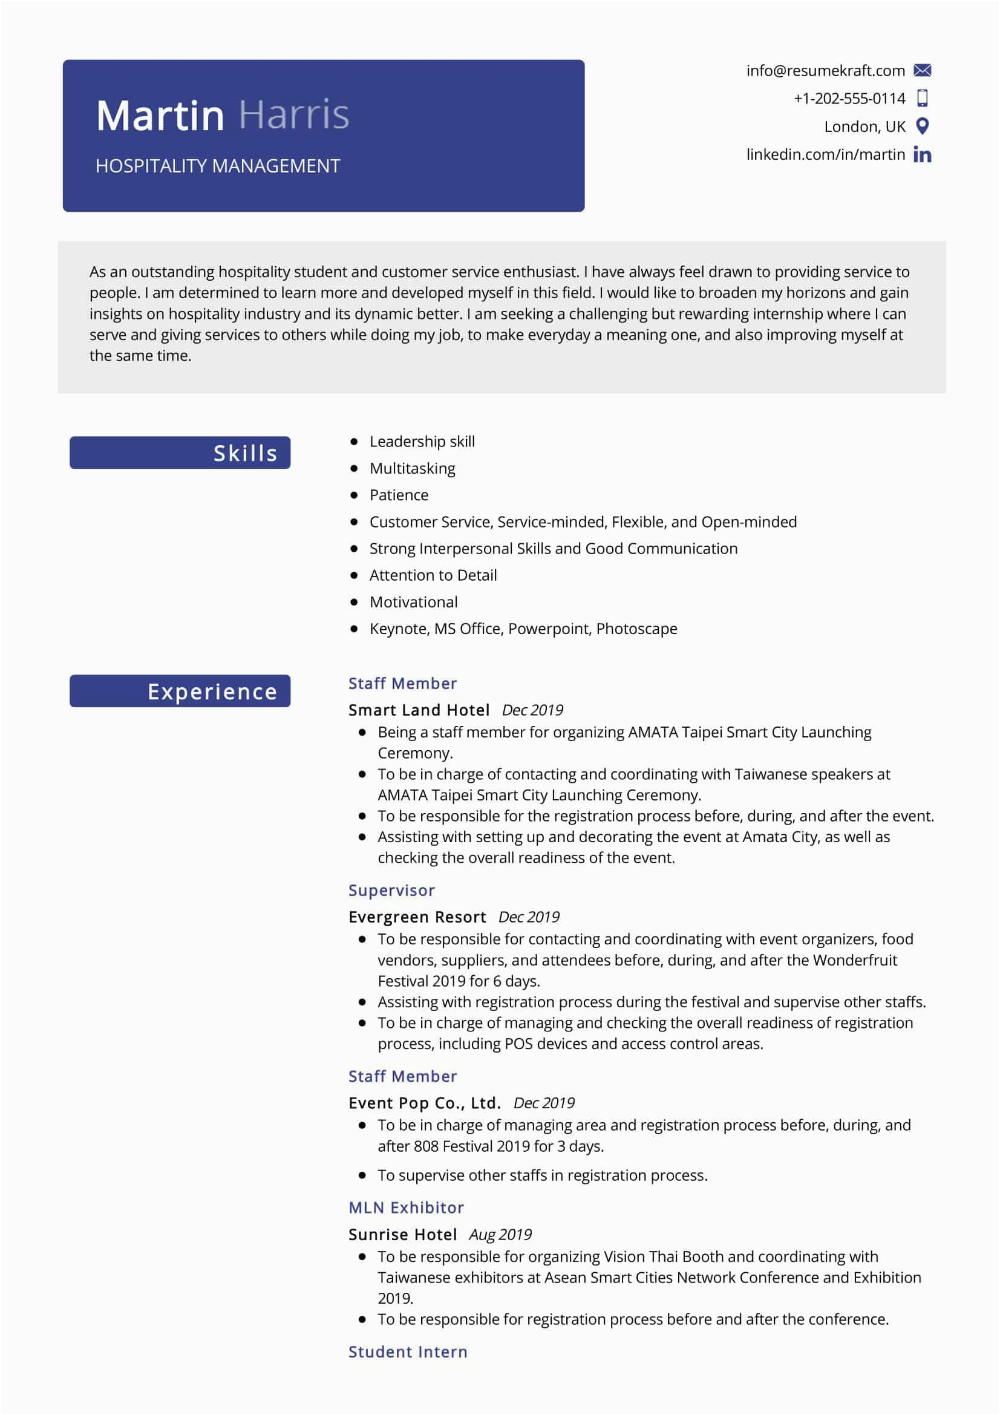 Sample Resume for Hospitality and tourism Management 100 Professional Resume Samples for 2020